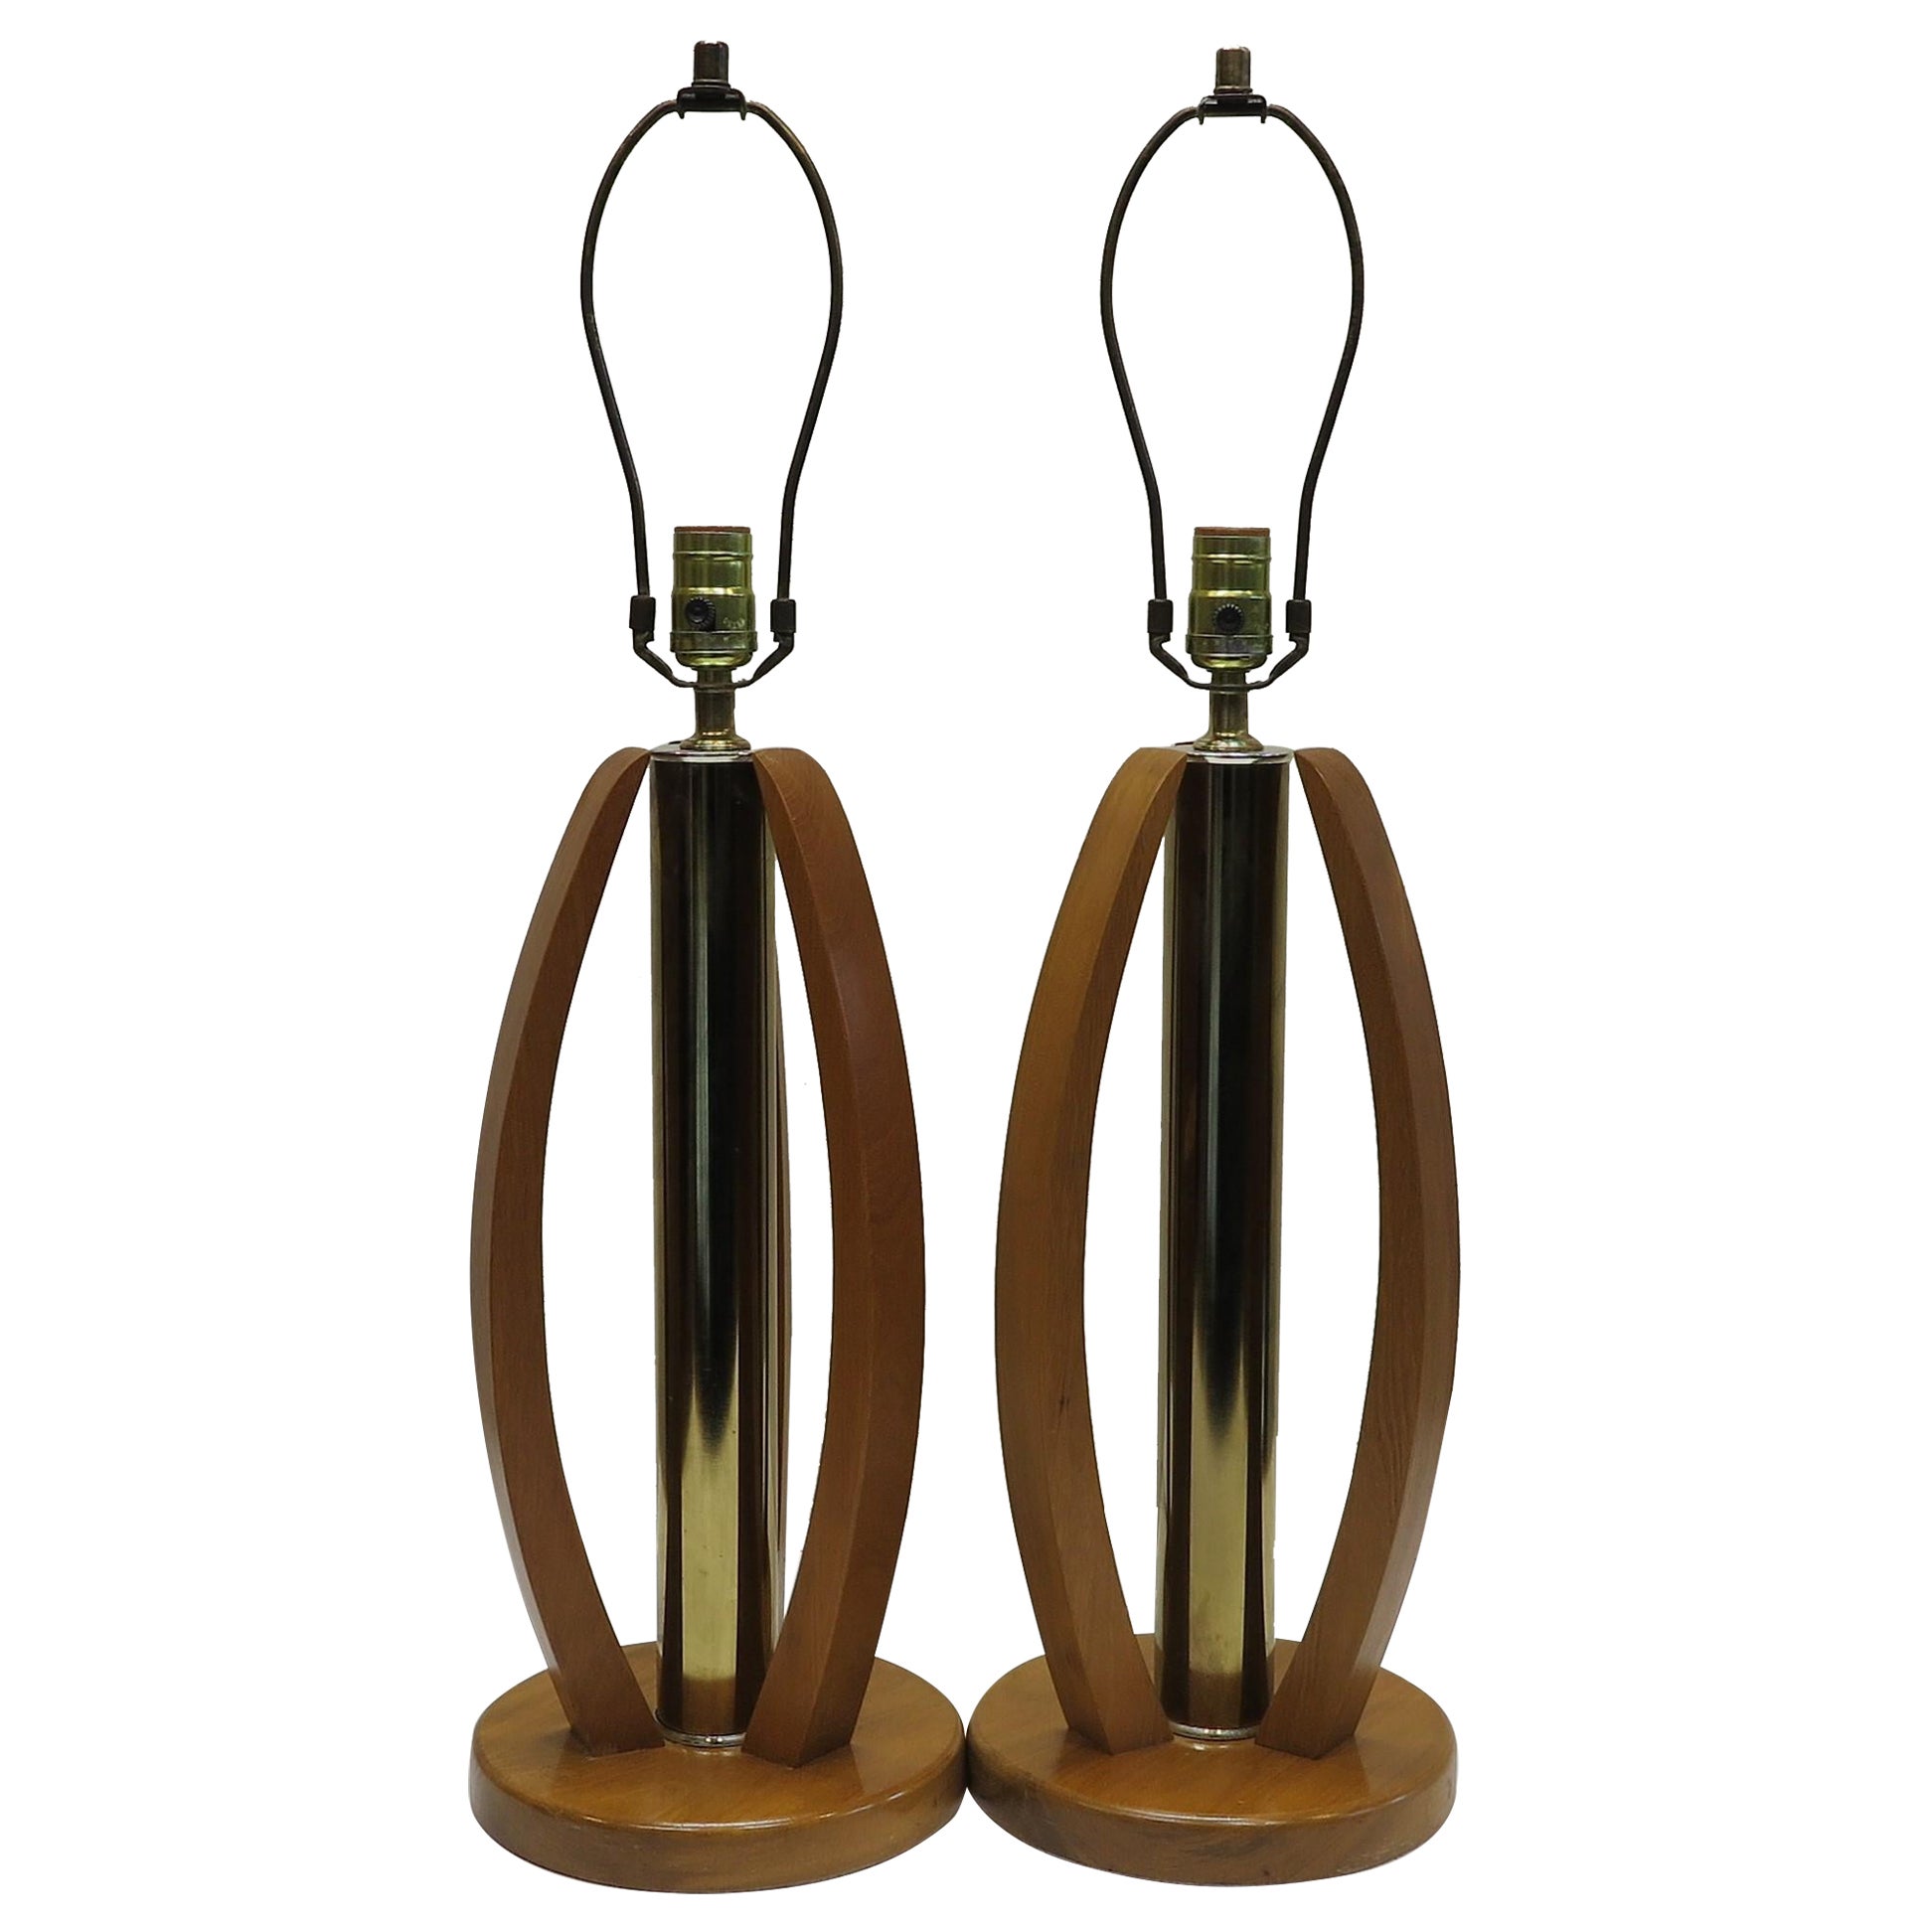 Pair of Mid-Century Modern Brass and Wood Table Lamps